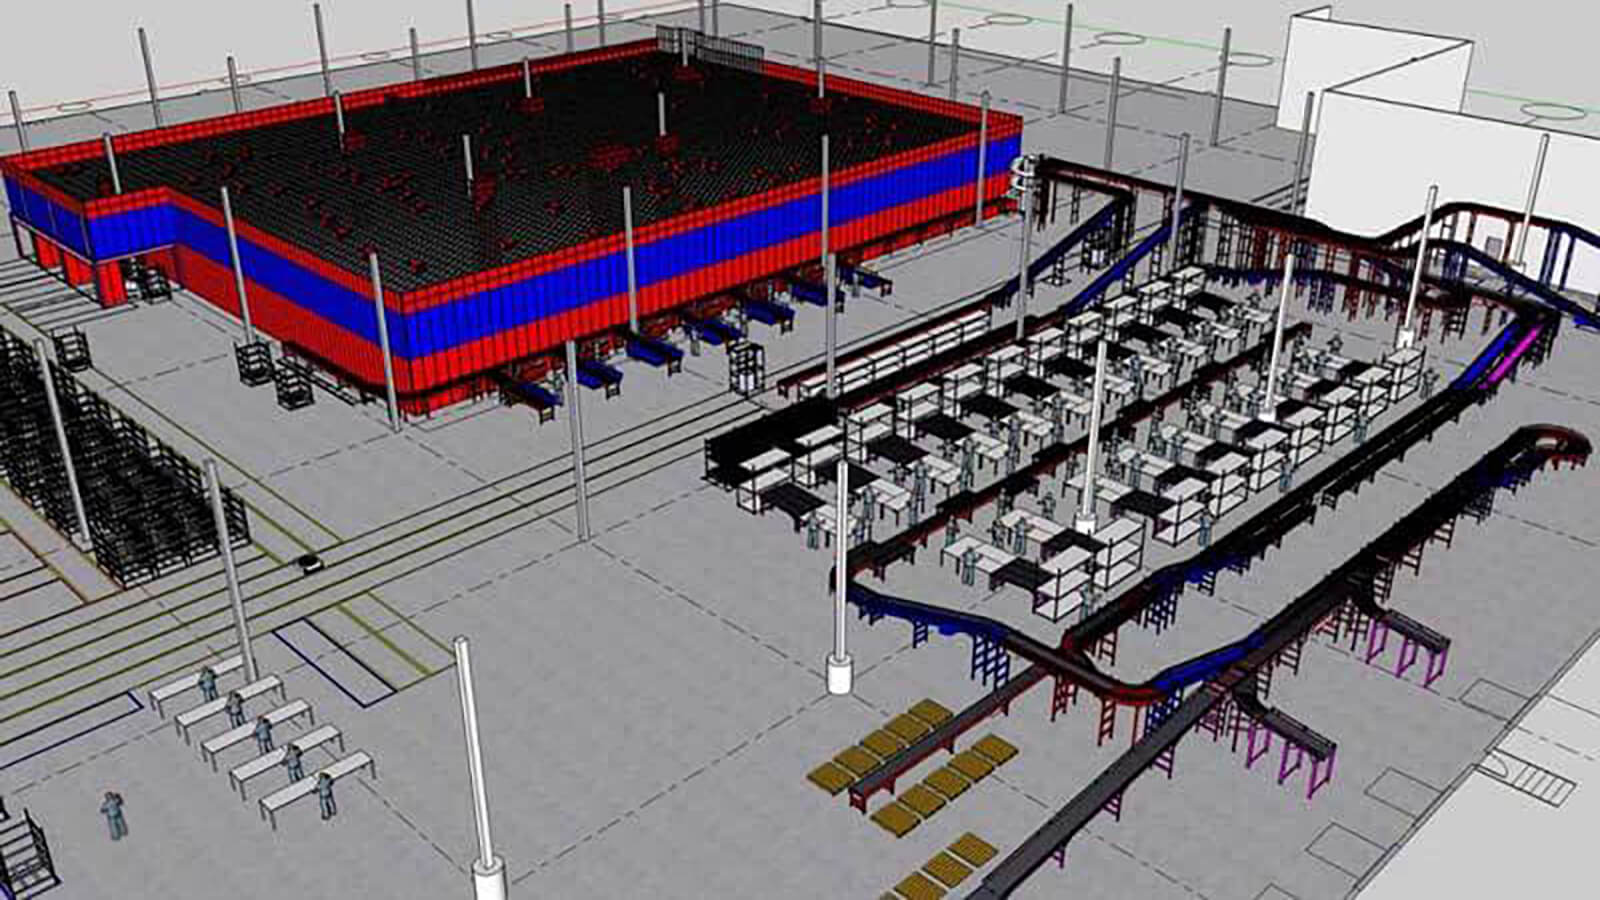 Warehouse automation system design and facility layout